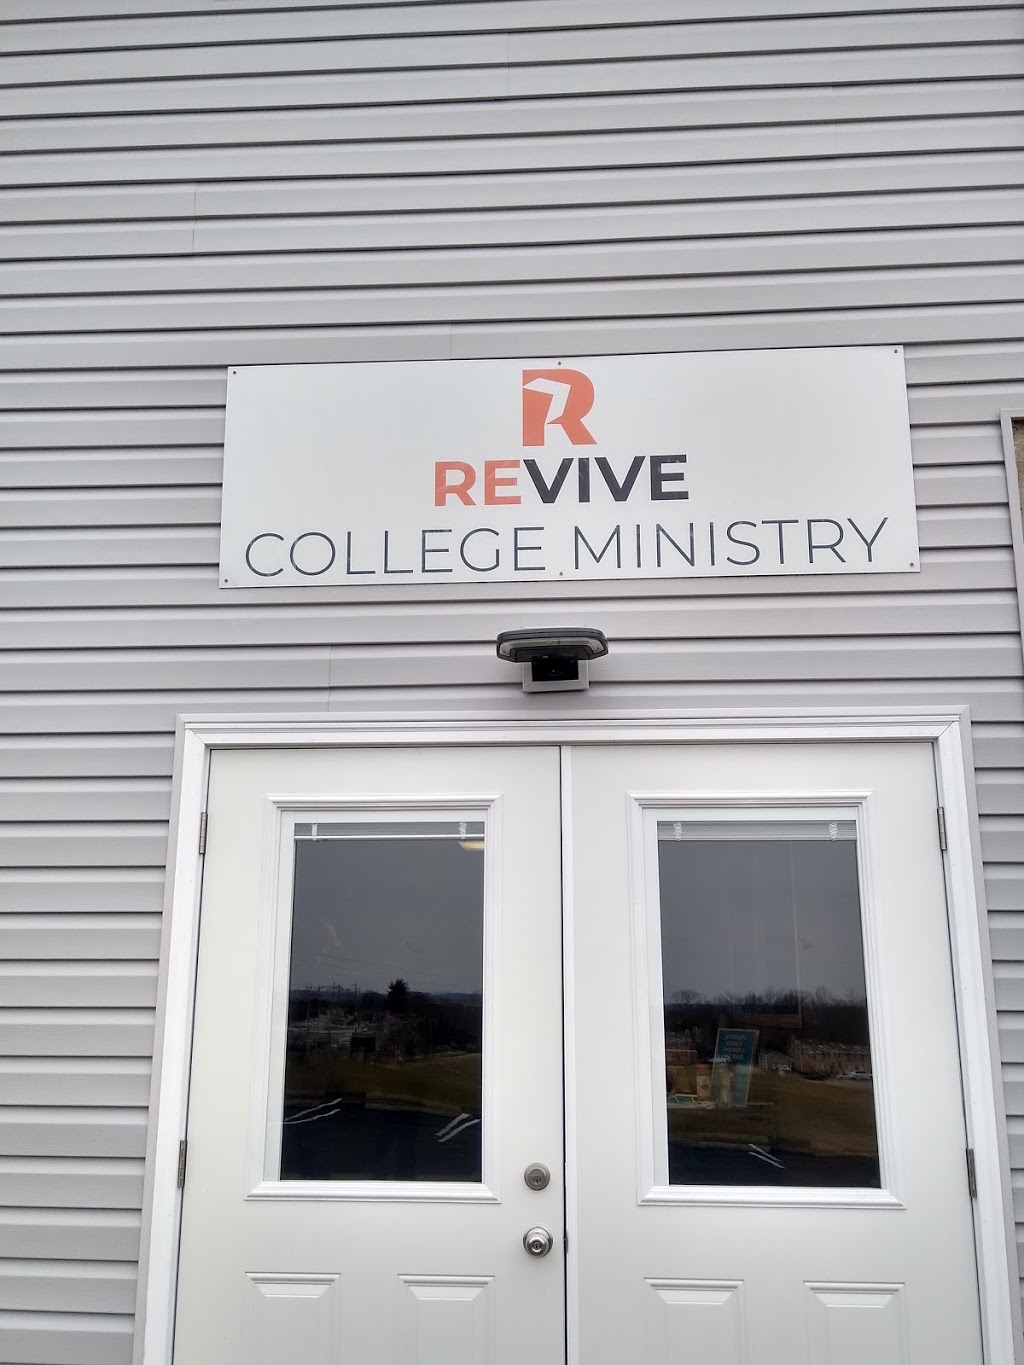 Revive College Ministry | Missouri State Rd, Arnold, MO 63010, USA | Phone: (636) 296-2703 ext. 180